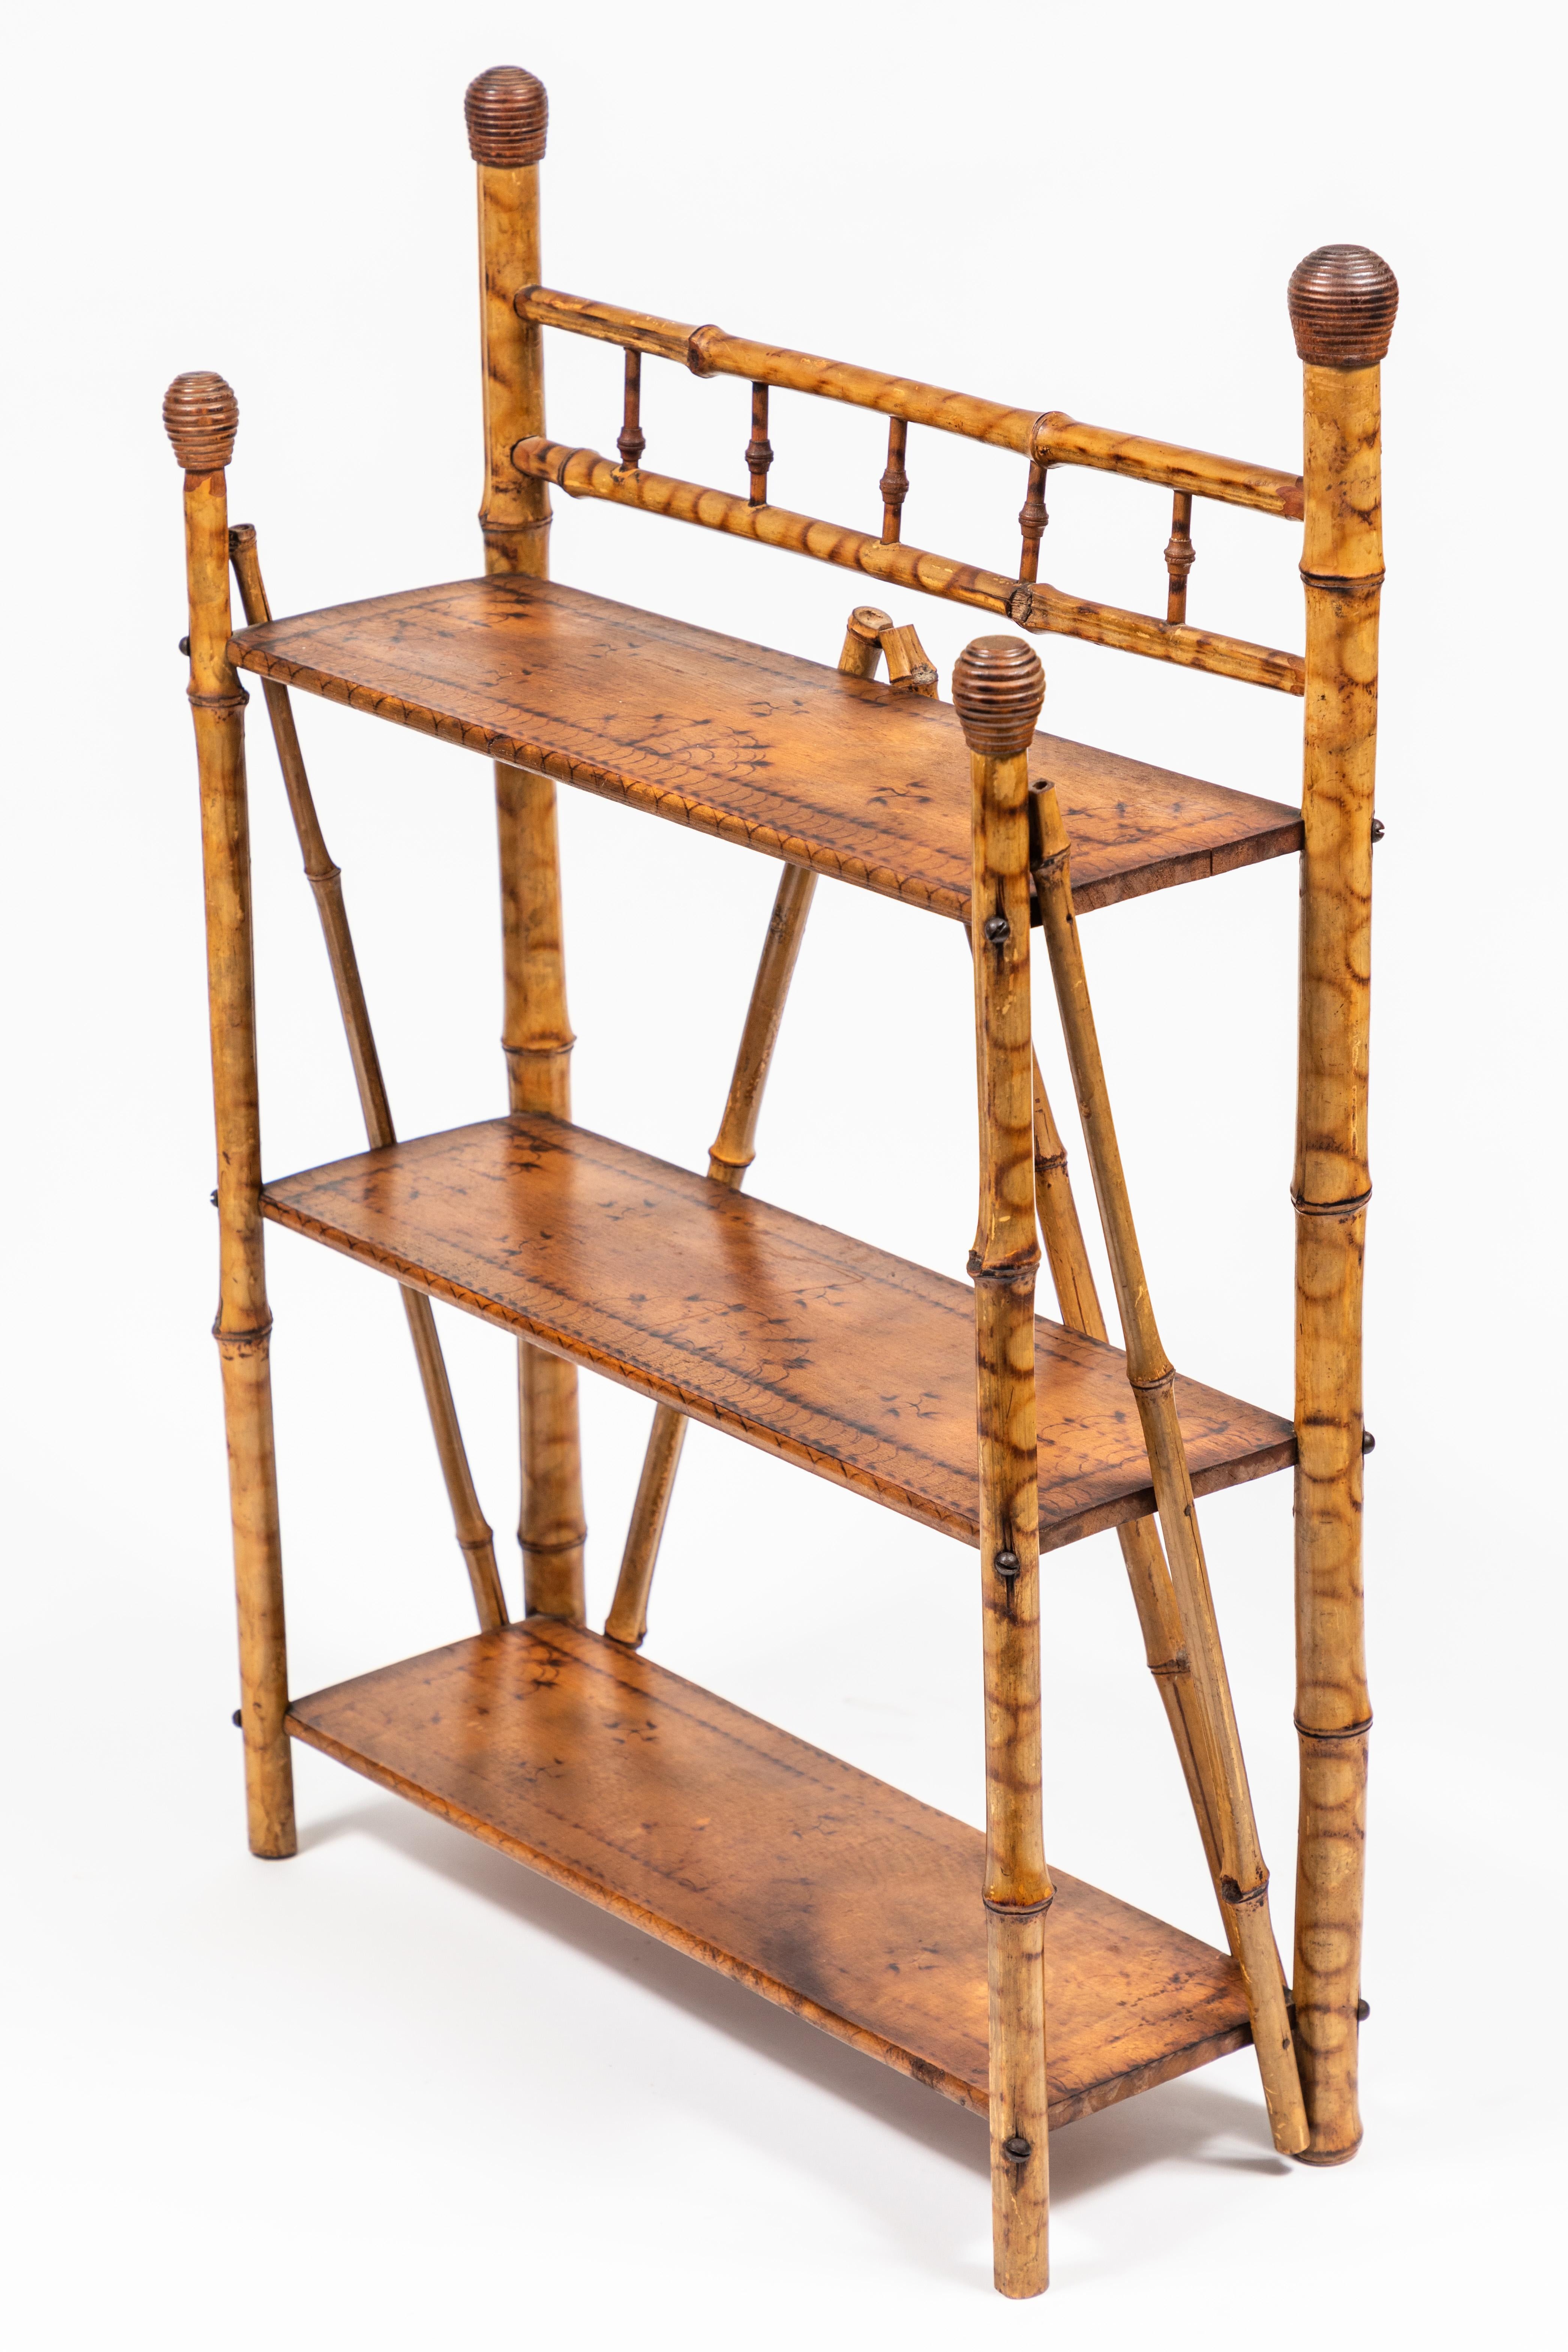 Petite antique bamboo 3-tier standing or hanging shelf.
Posts are topped with carved round finials with ridges. Each shelf is adorned with a hand-done repetitive burn pattern decoration around the edges and in the center.